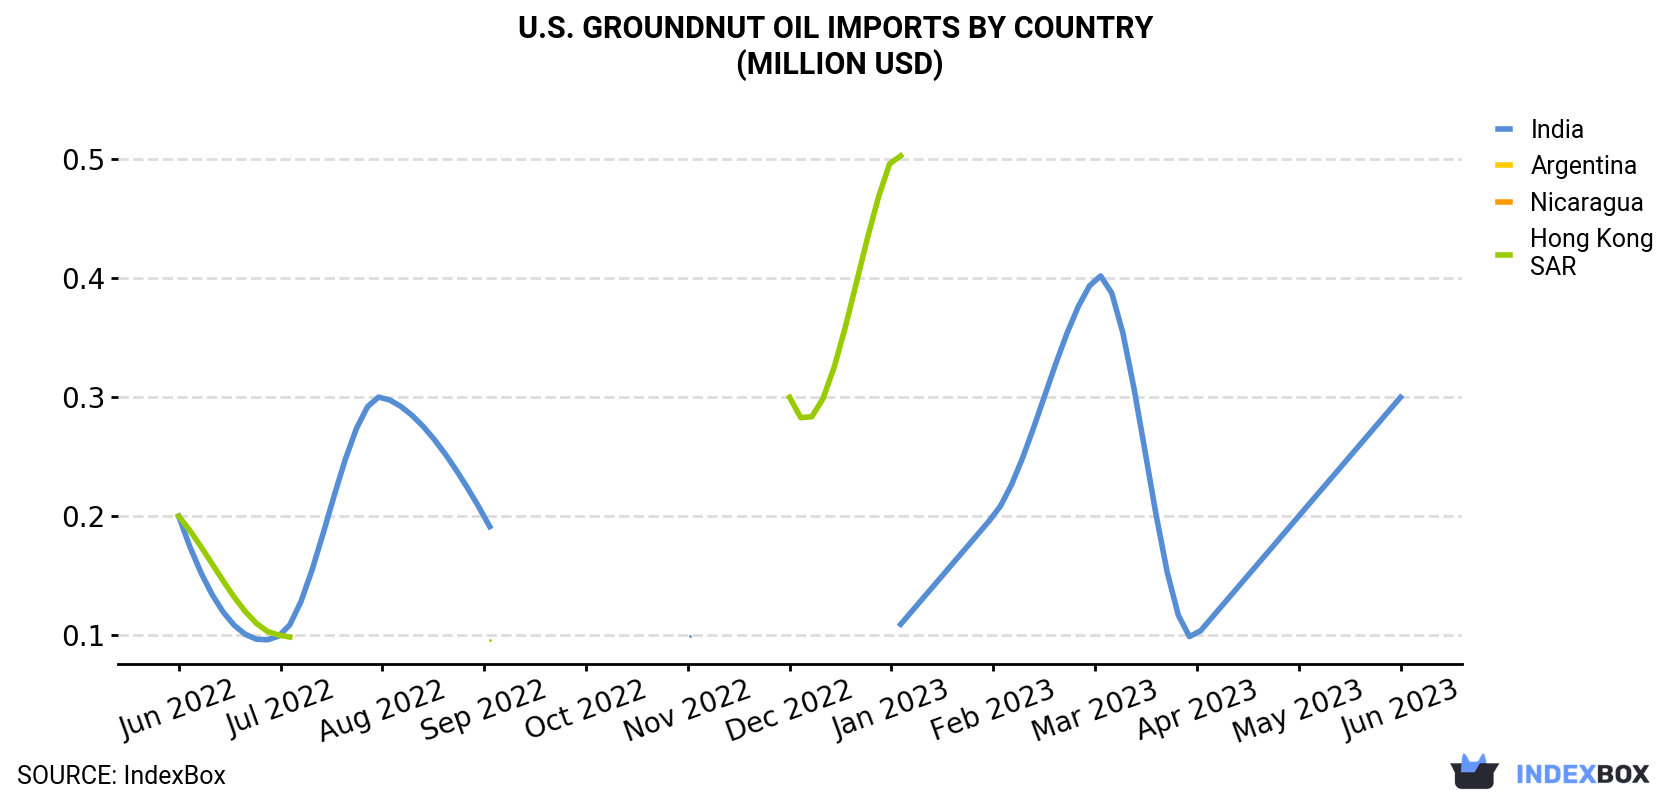 U.S. Groundnut Oil Imports By Country (Million USD)